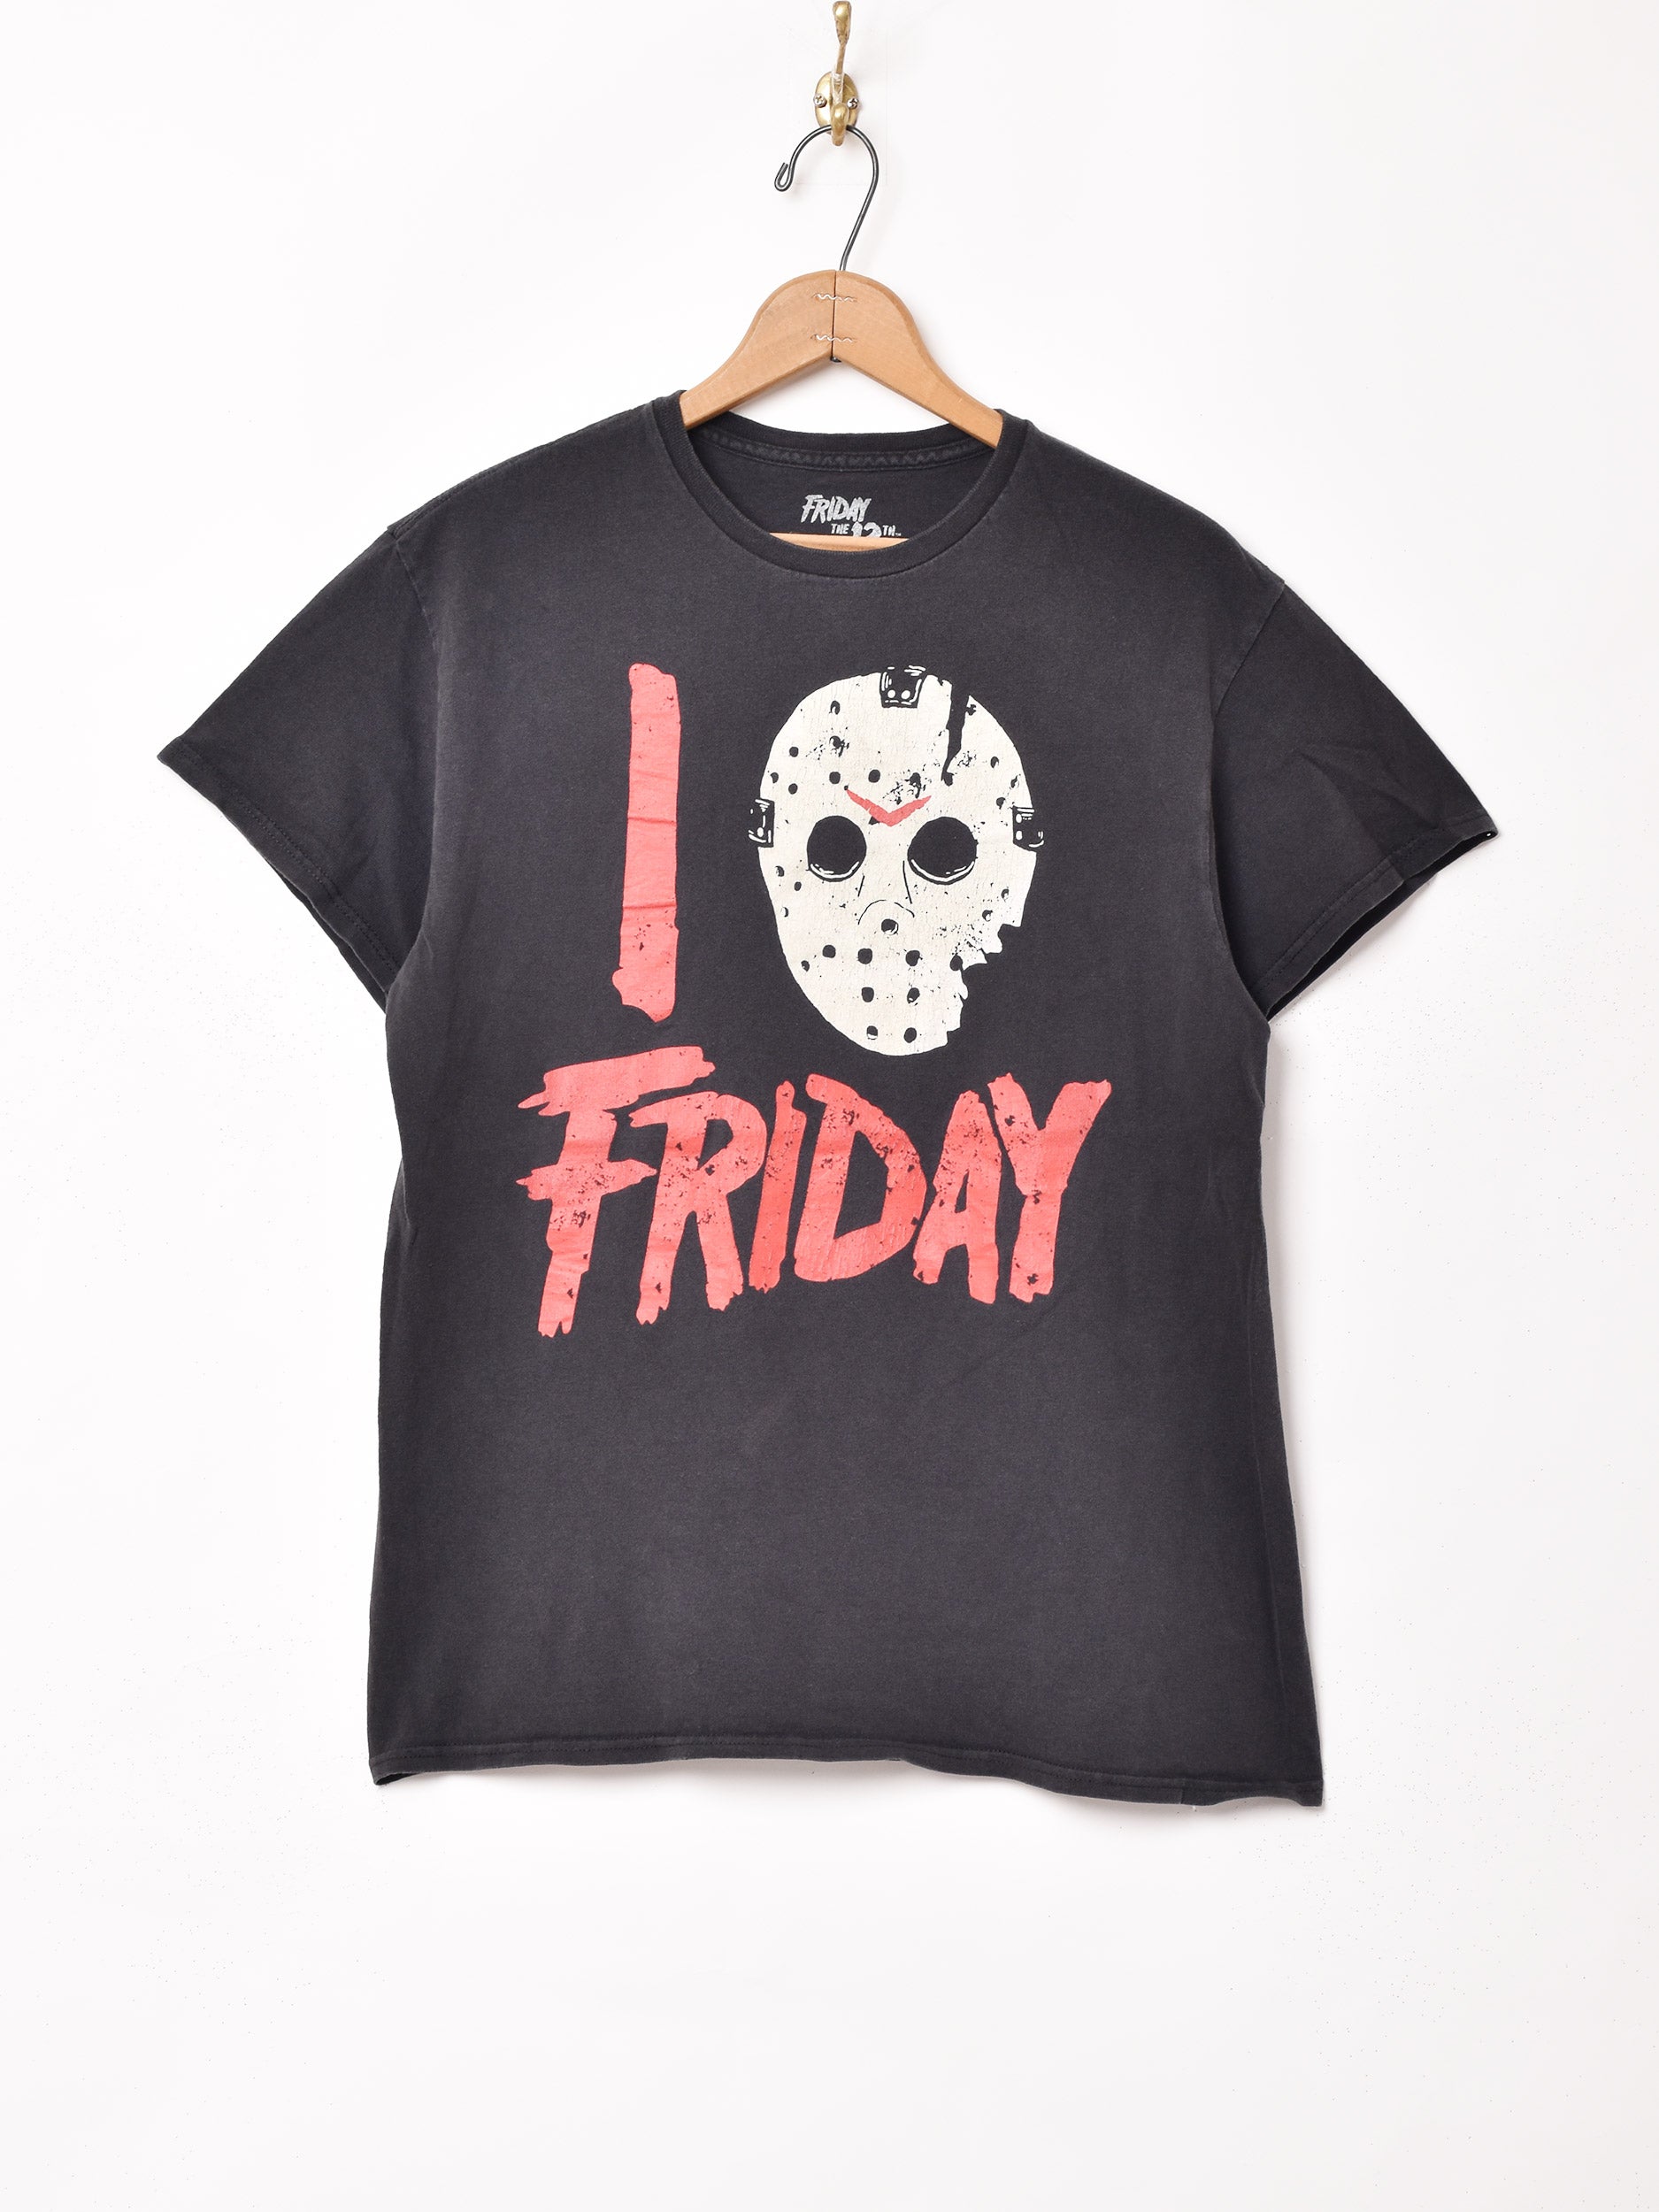 Fraiday the 13th」ムービー プリントTシャツ – 古着屋Top of the Hill